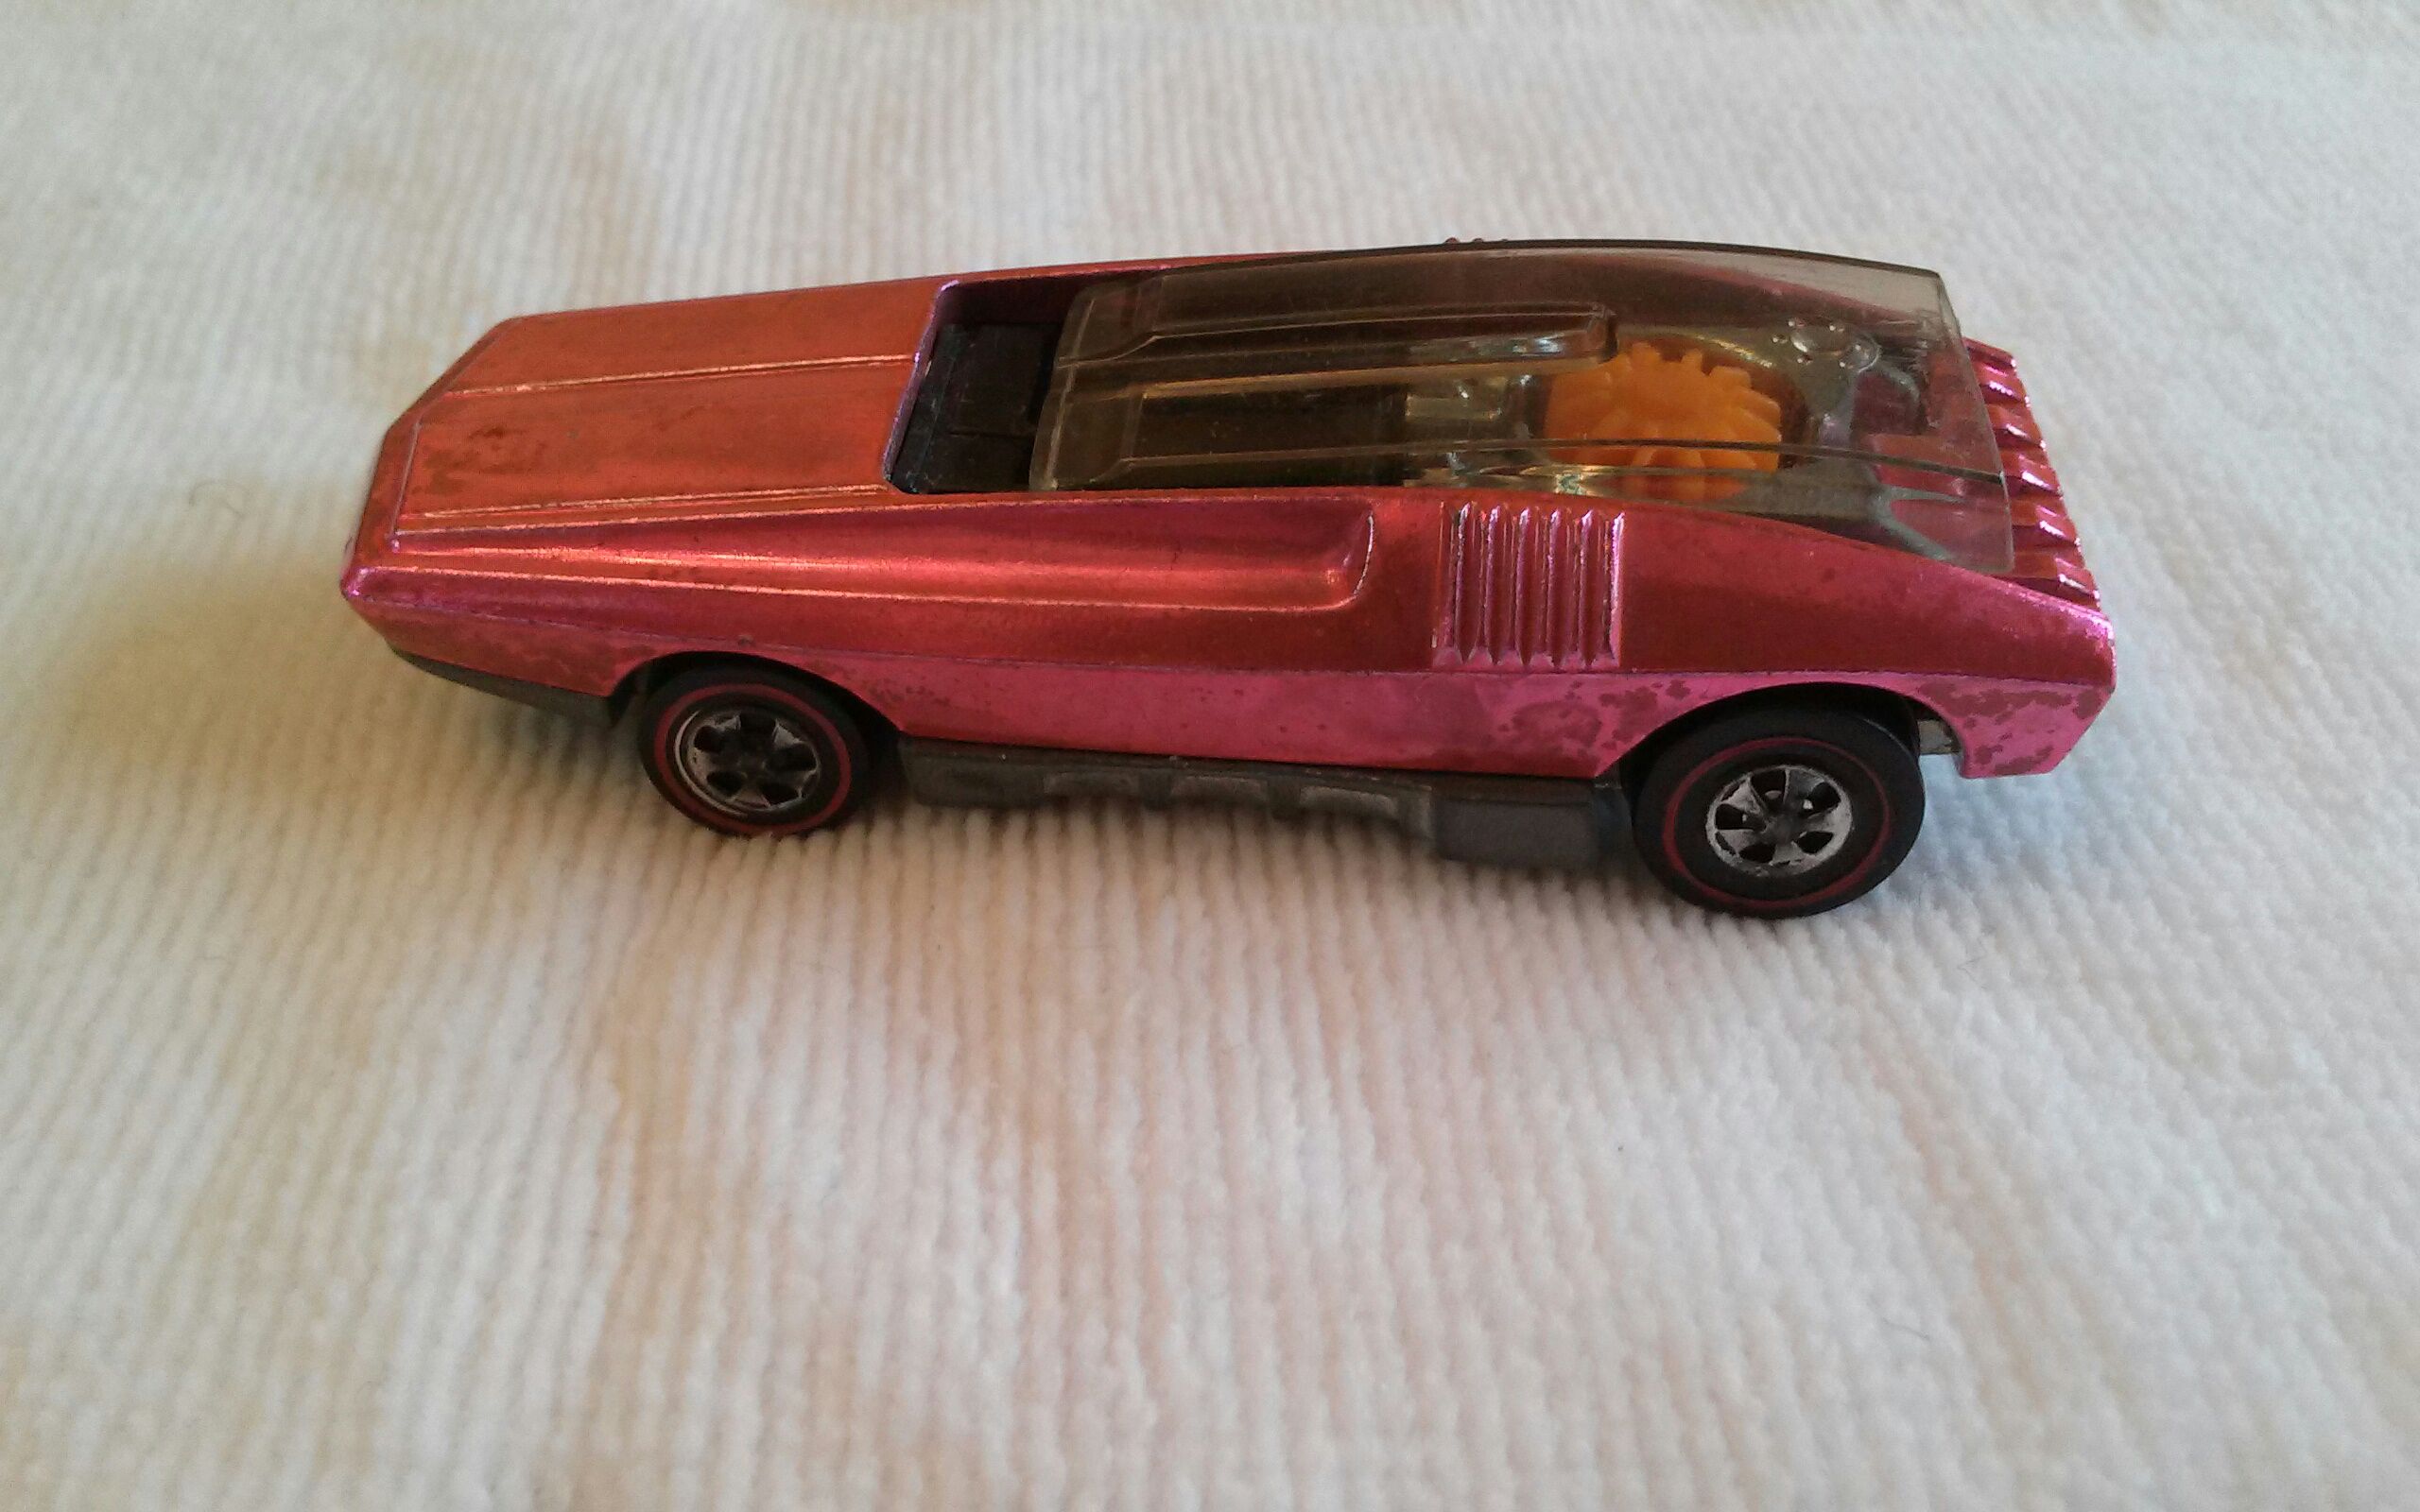 Whip Creamer - 1970 Hot Wheels toy car collectible - Main Image 1